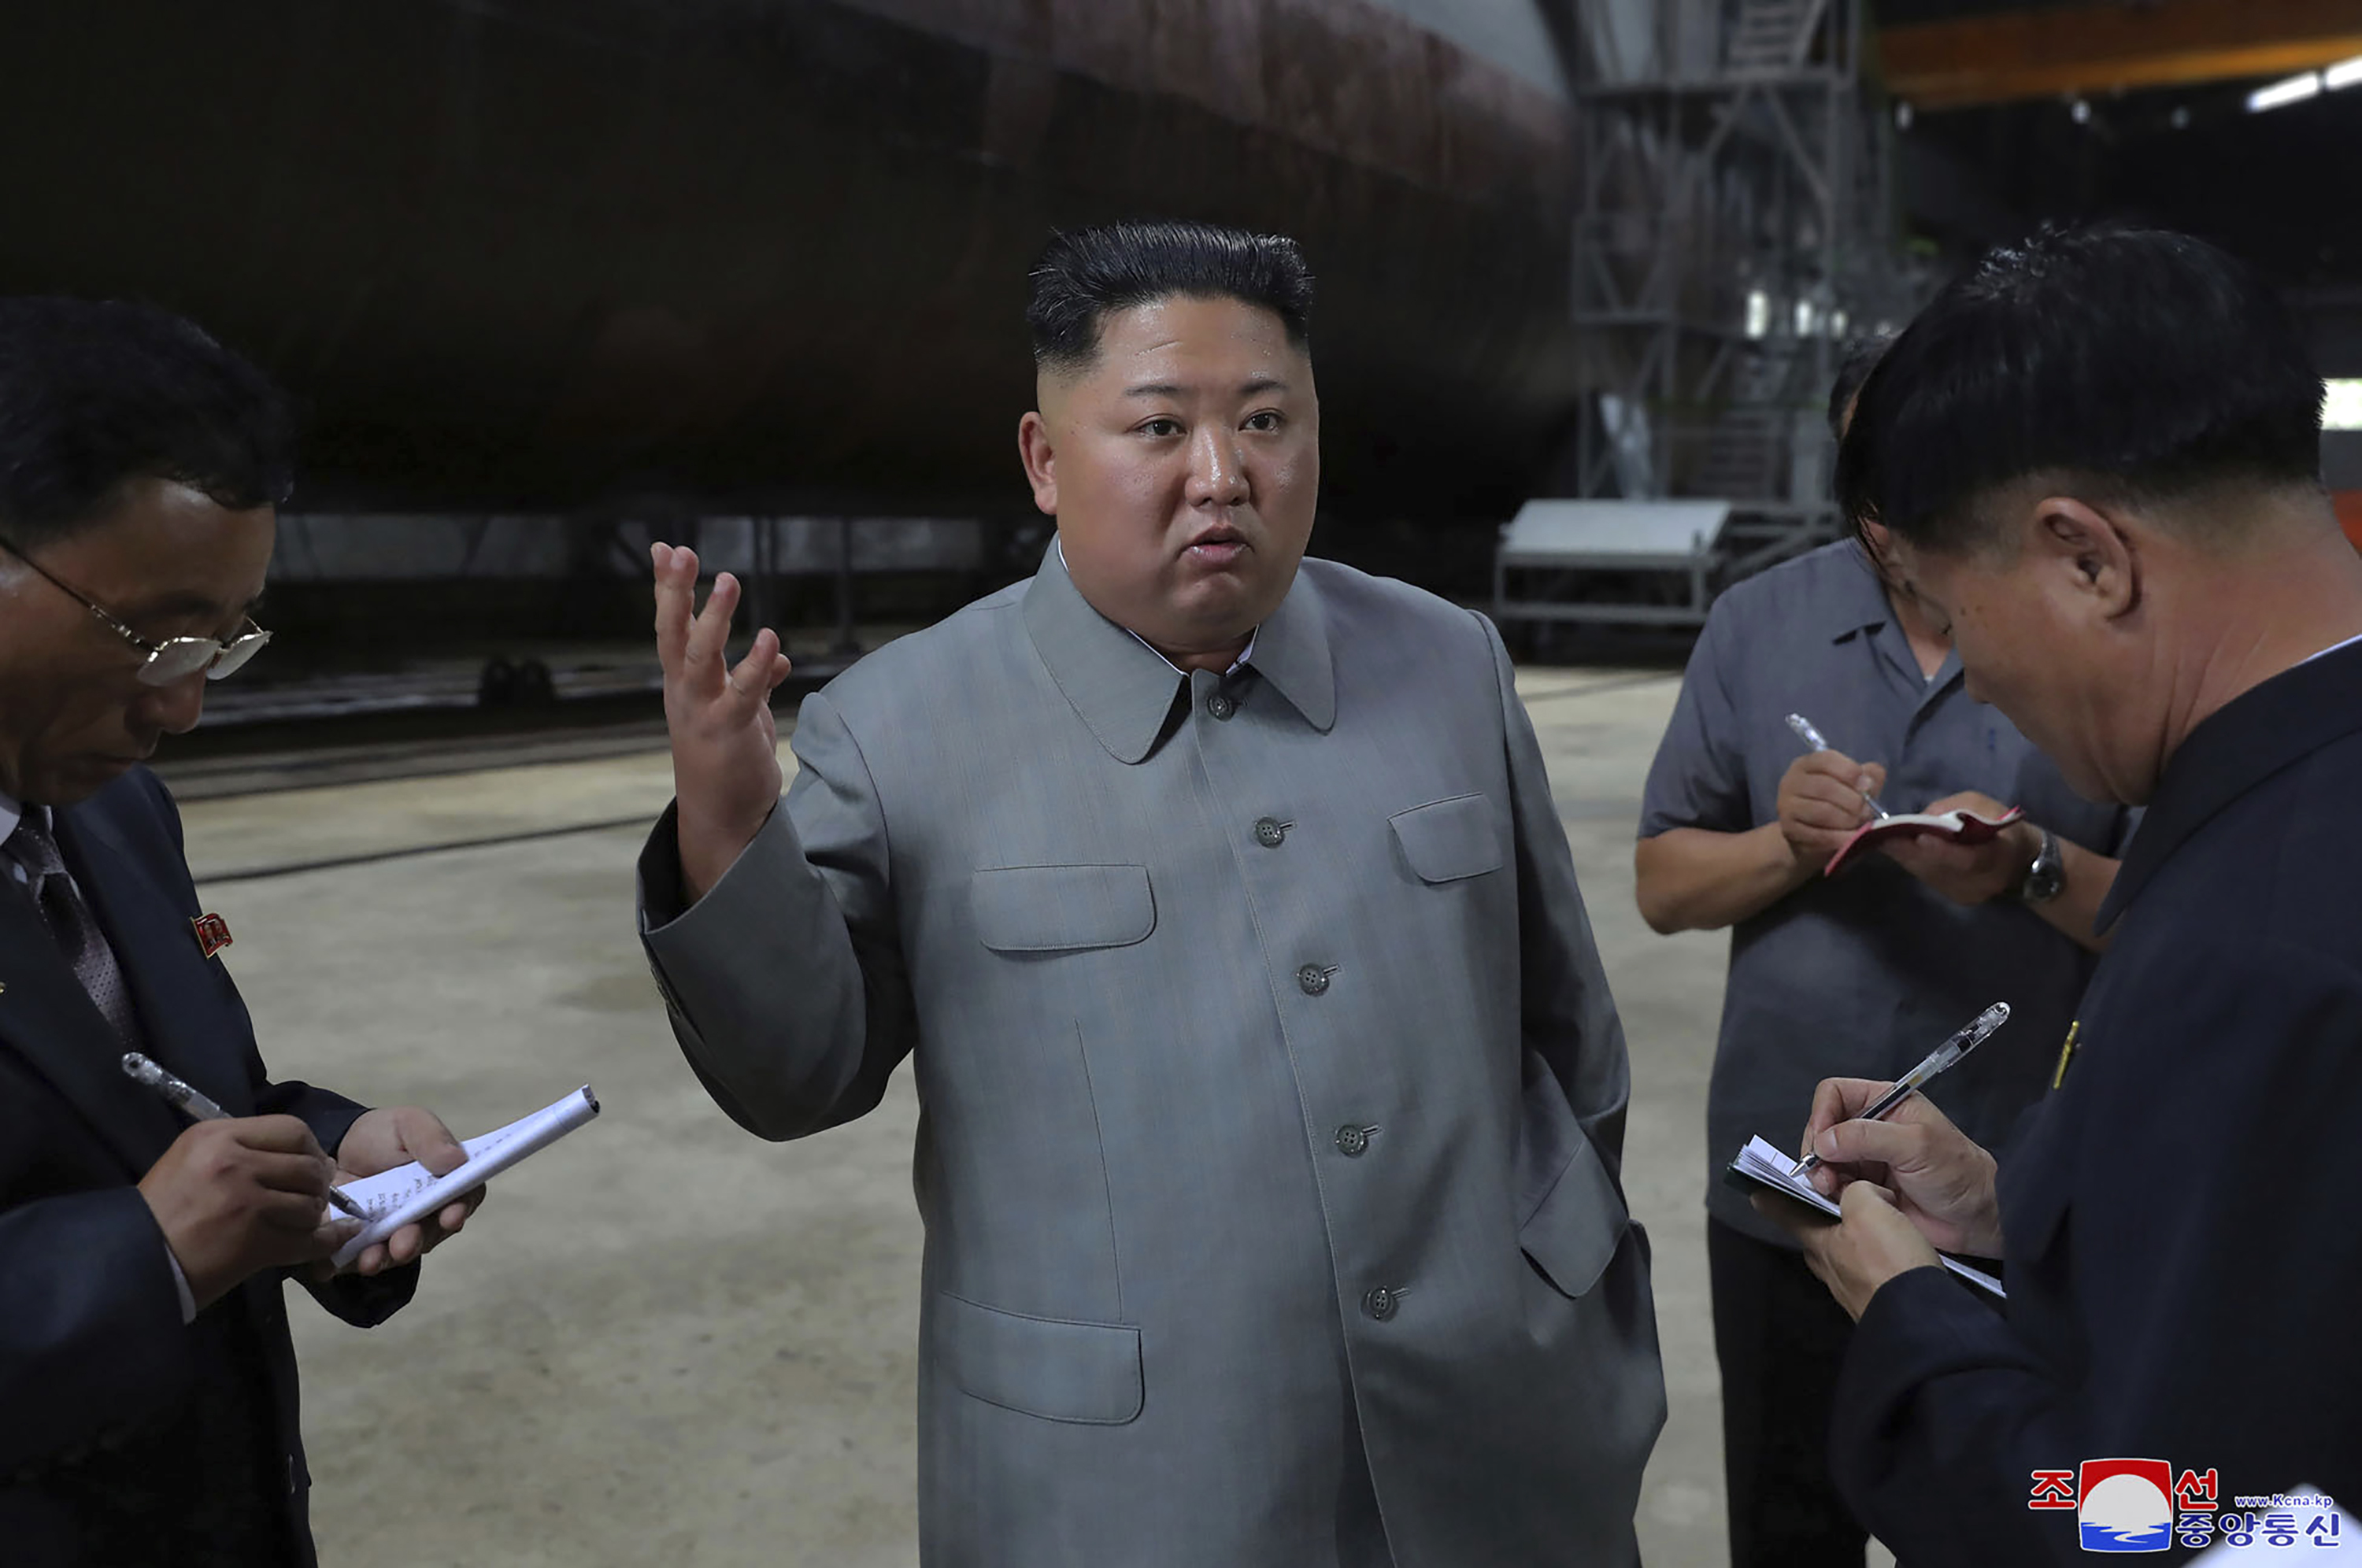 Kim Jong Un inspects new submarine as talks with US stall